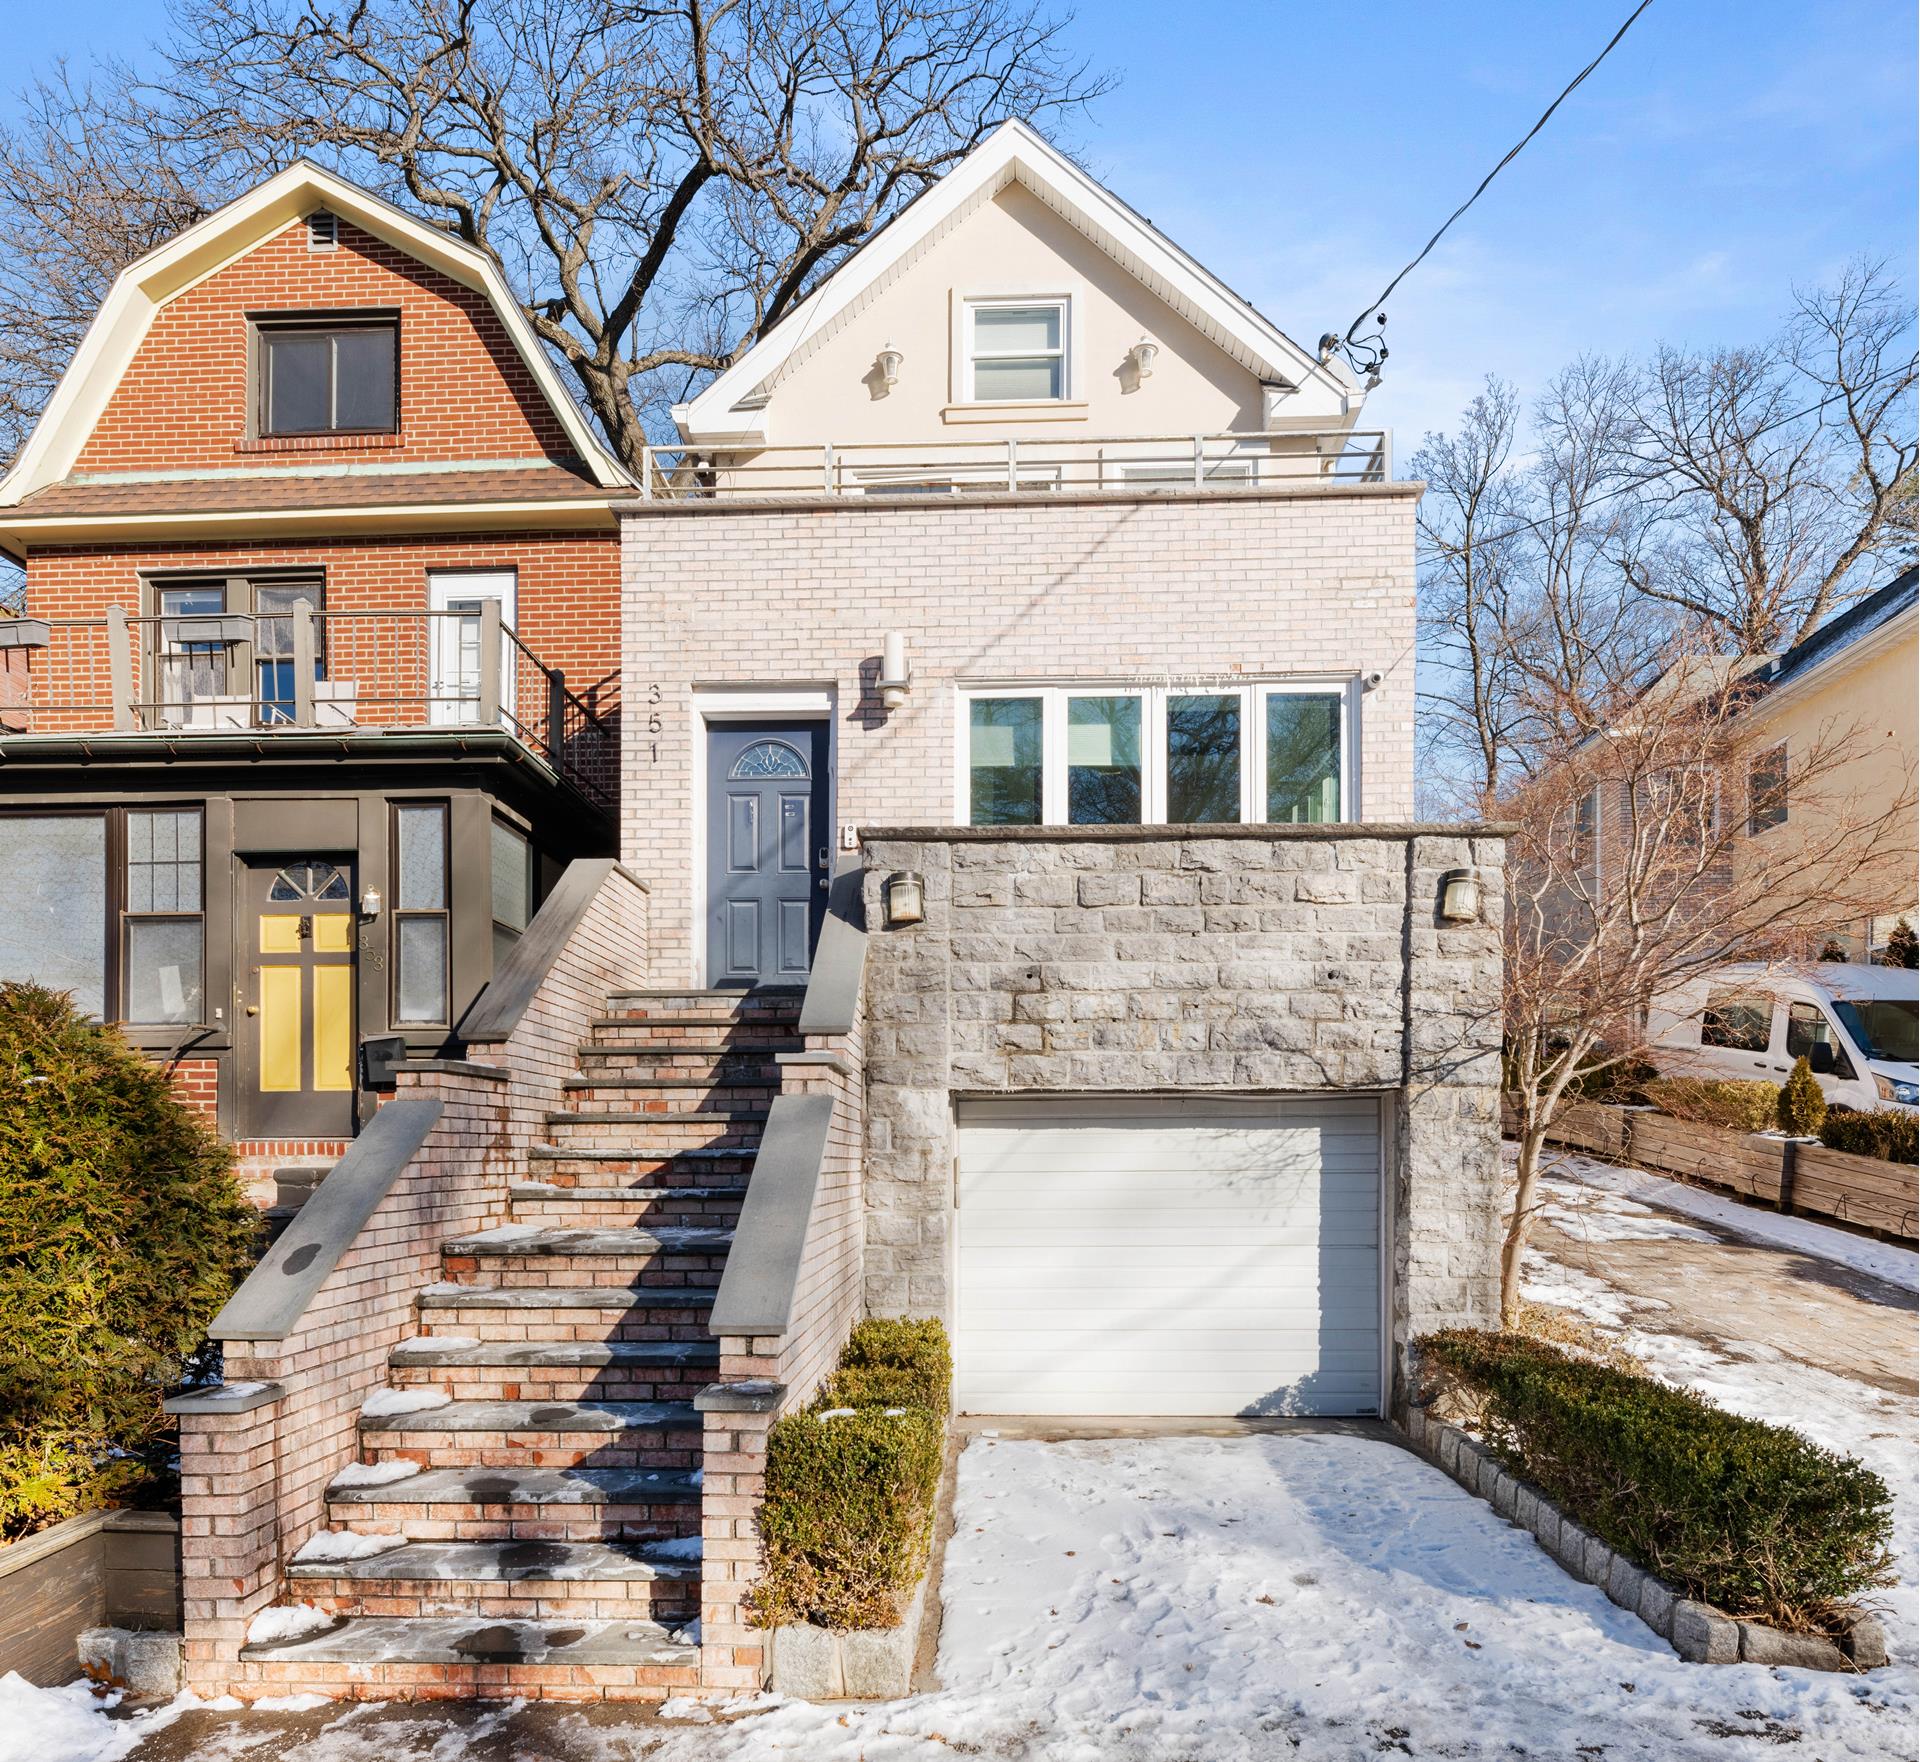 351 West 262nd Street, North Riverdale, Bronx, New York - 4 Bedrooms  
3.5 Bathrooms  
8 Rooms - 